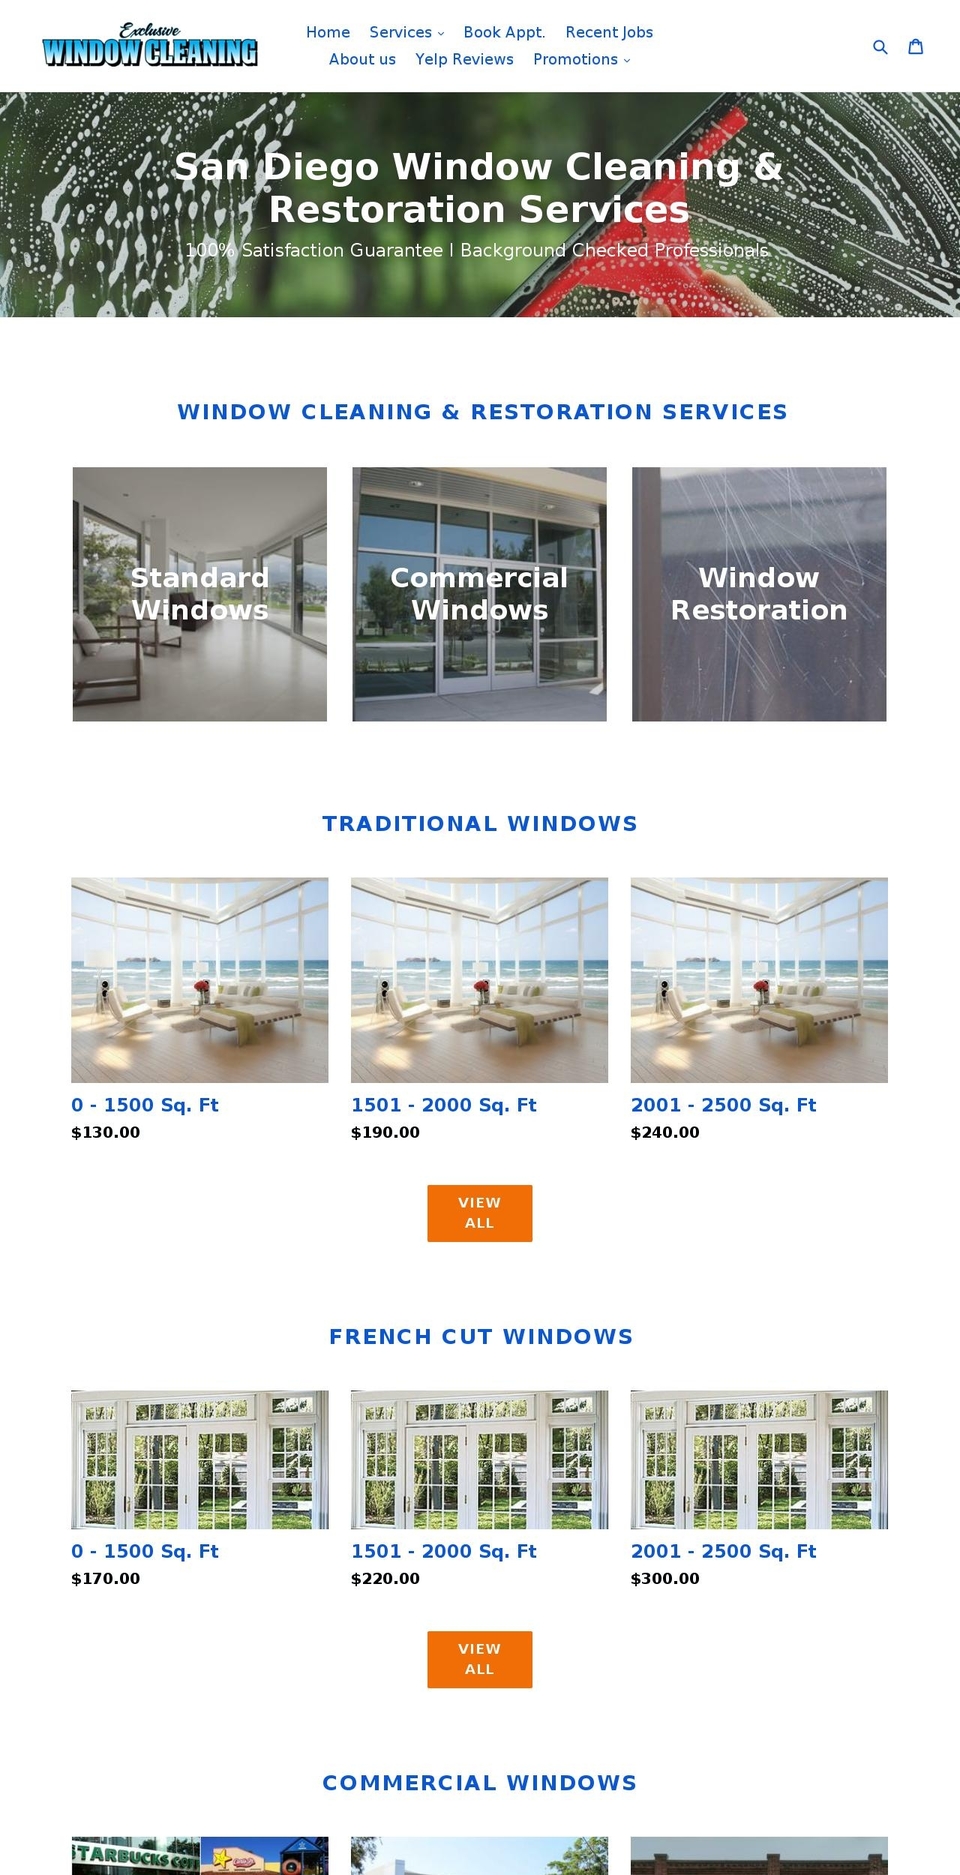 Copy of Debut Shopify theme site example carlsbadwindowcleaningdeals.com